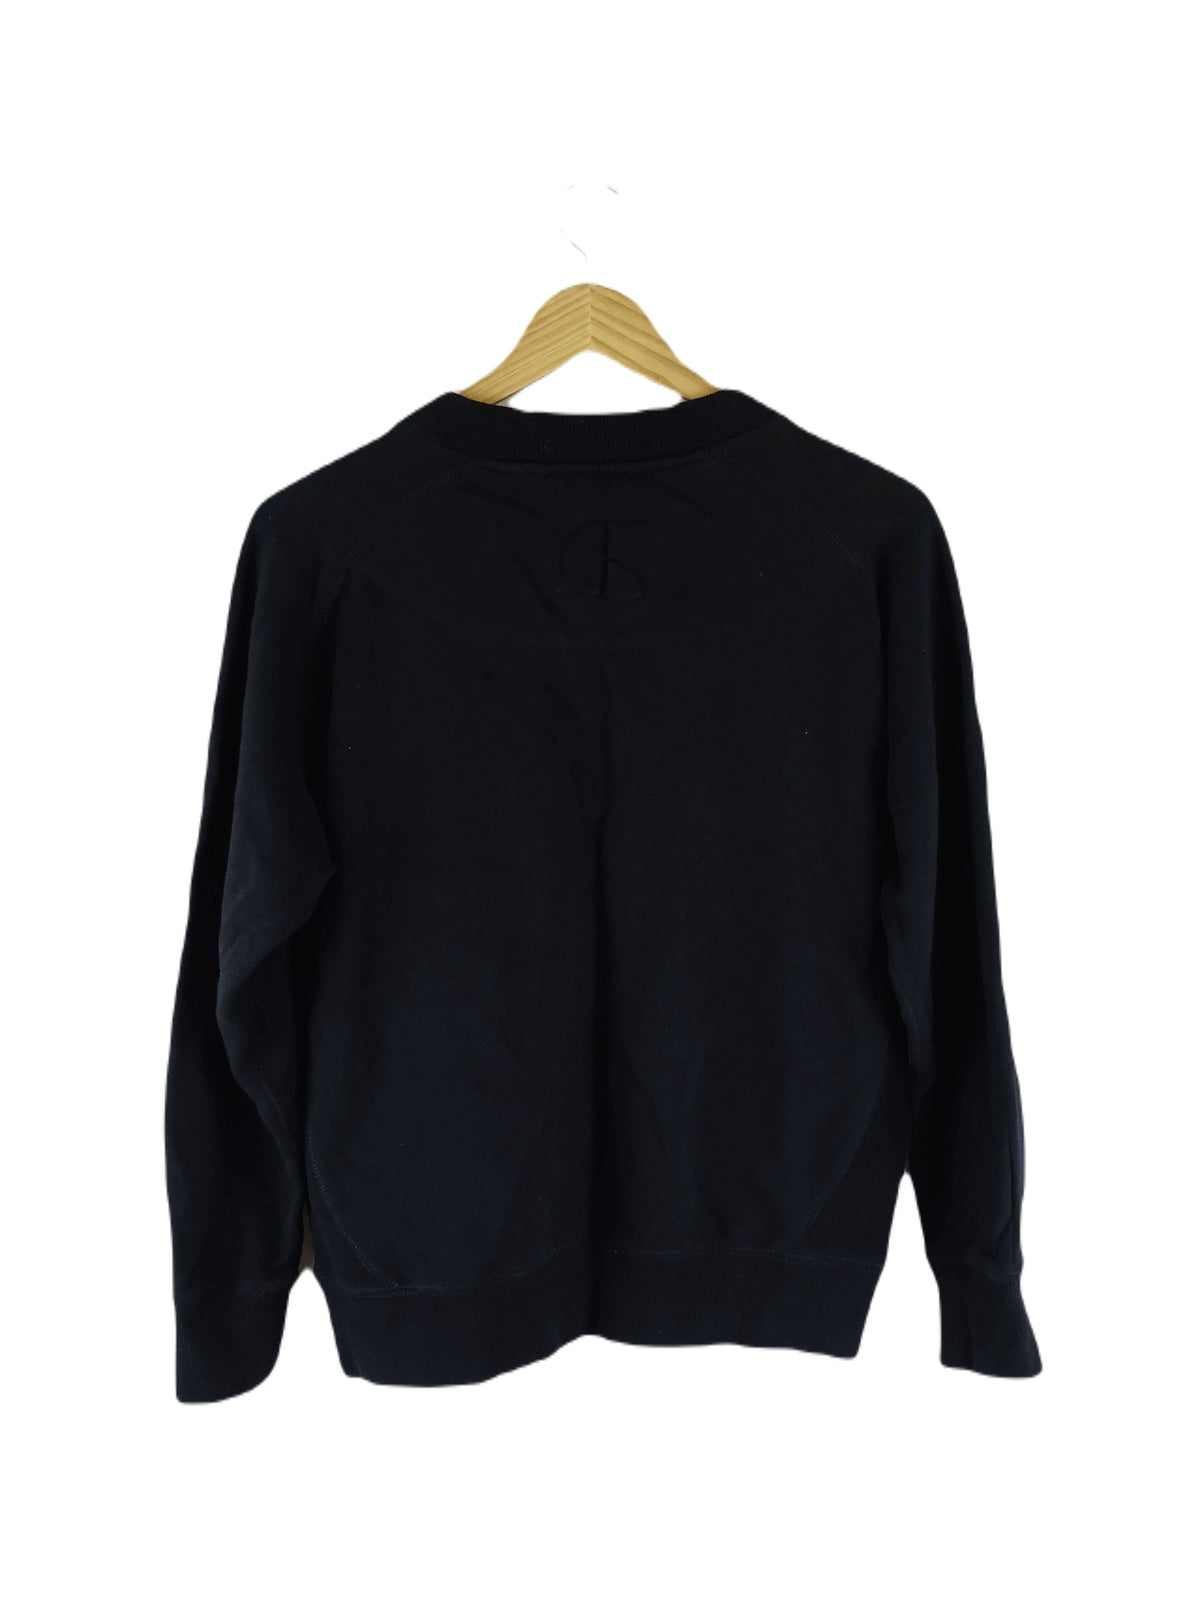 Country Road Black Crew Neck Jumper XS